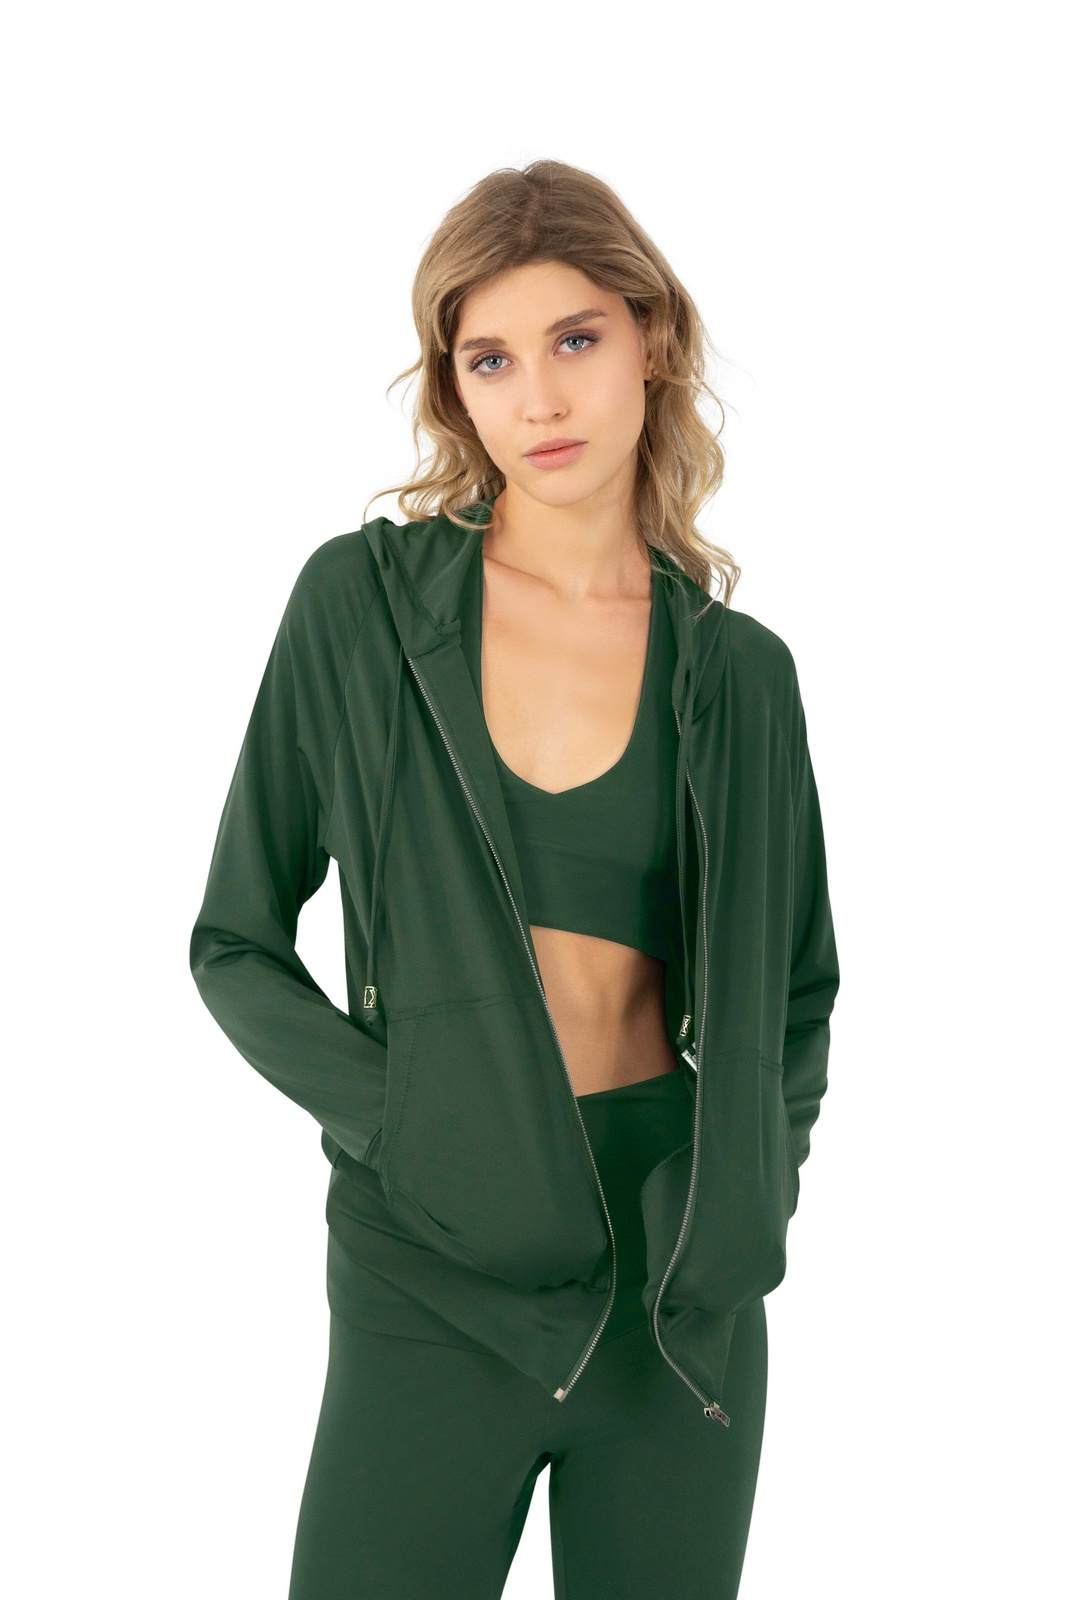 Eco friendly Hoodie with matching leggings and bralette crop top in army green made from eco friendly recycled plastic fabric by Ekoluxe, a sustainable loungewear brand